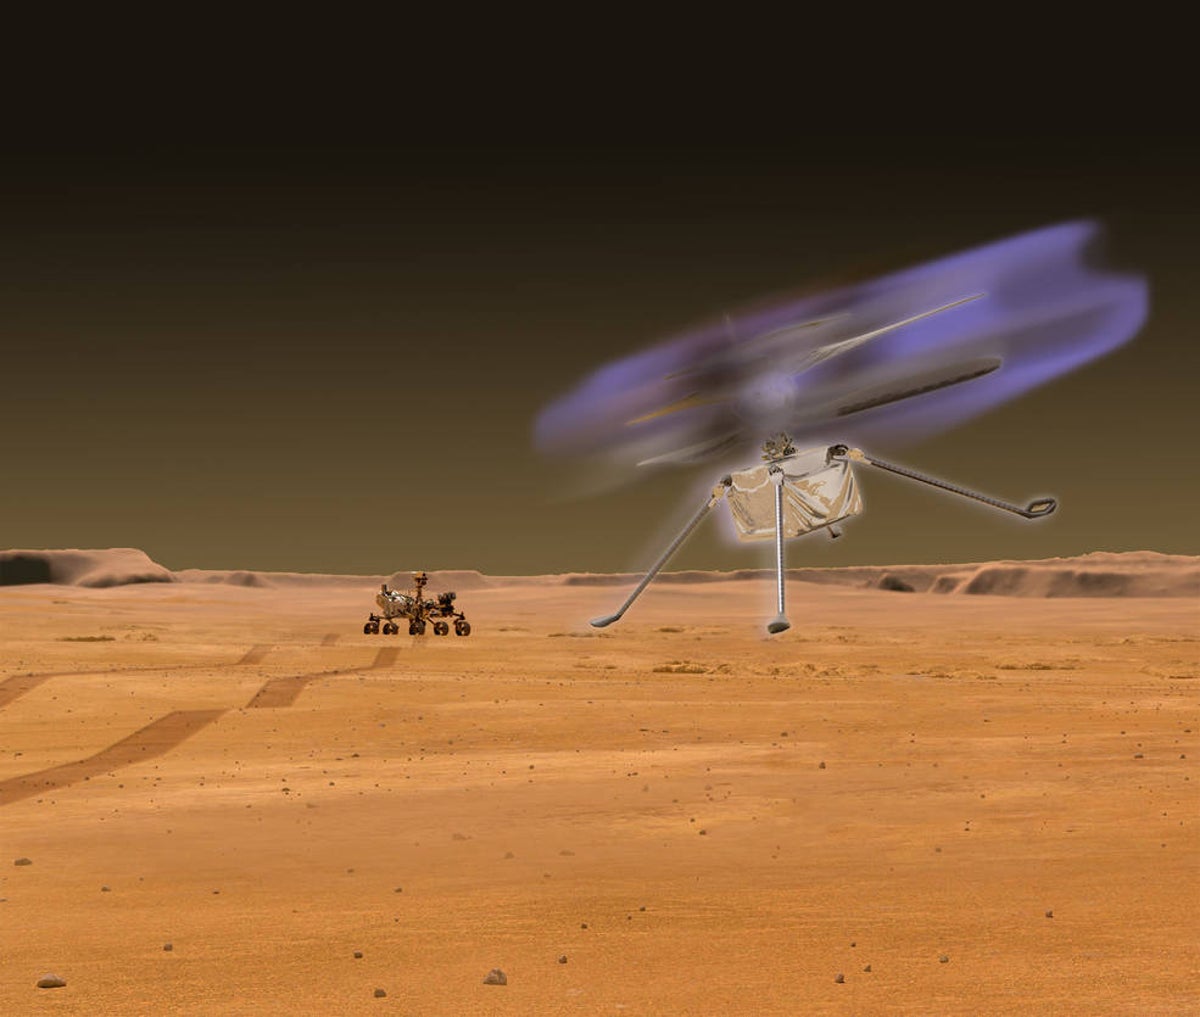 NASA says we could see drones shine on Mars